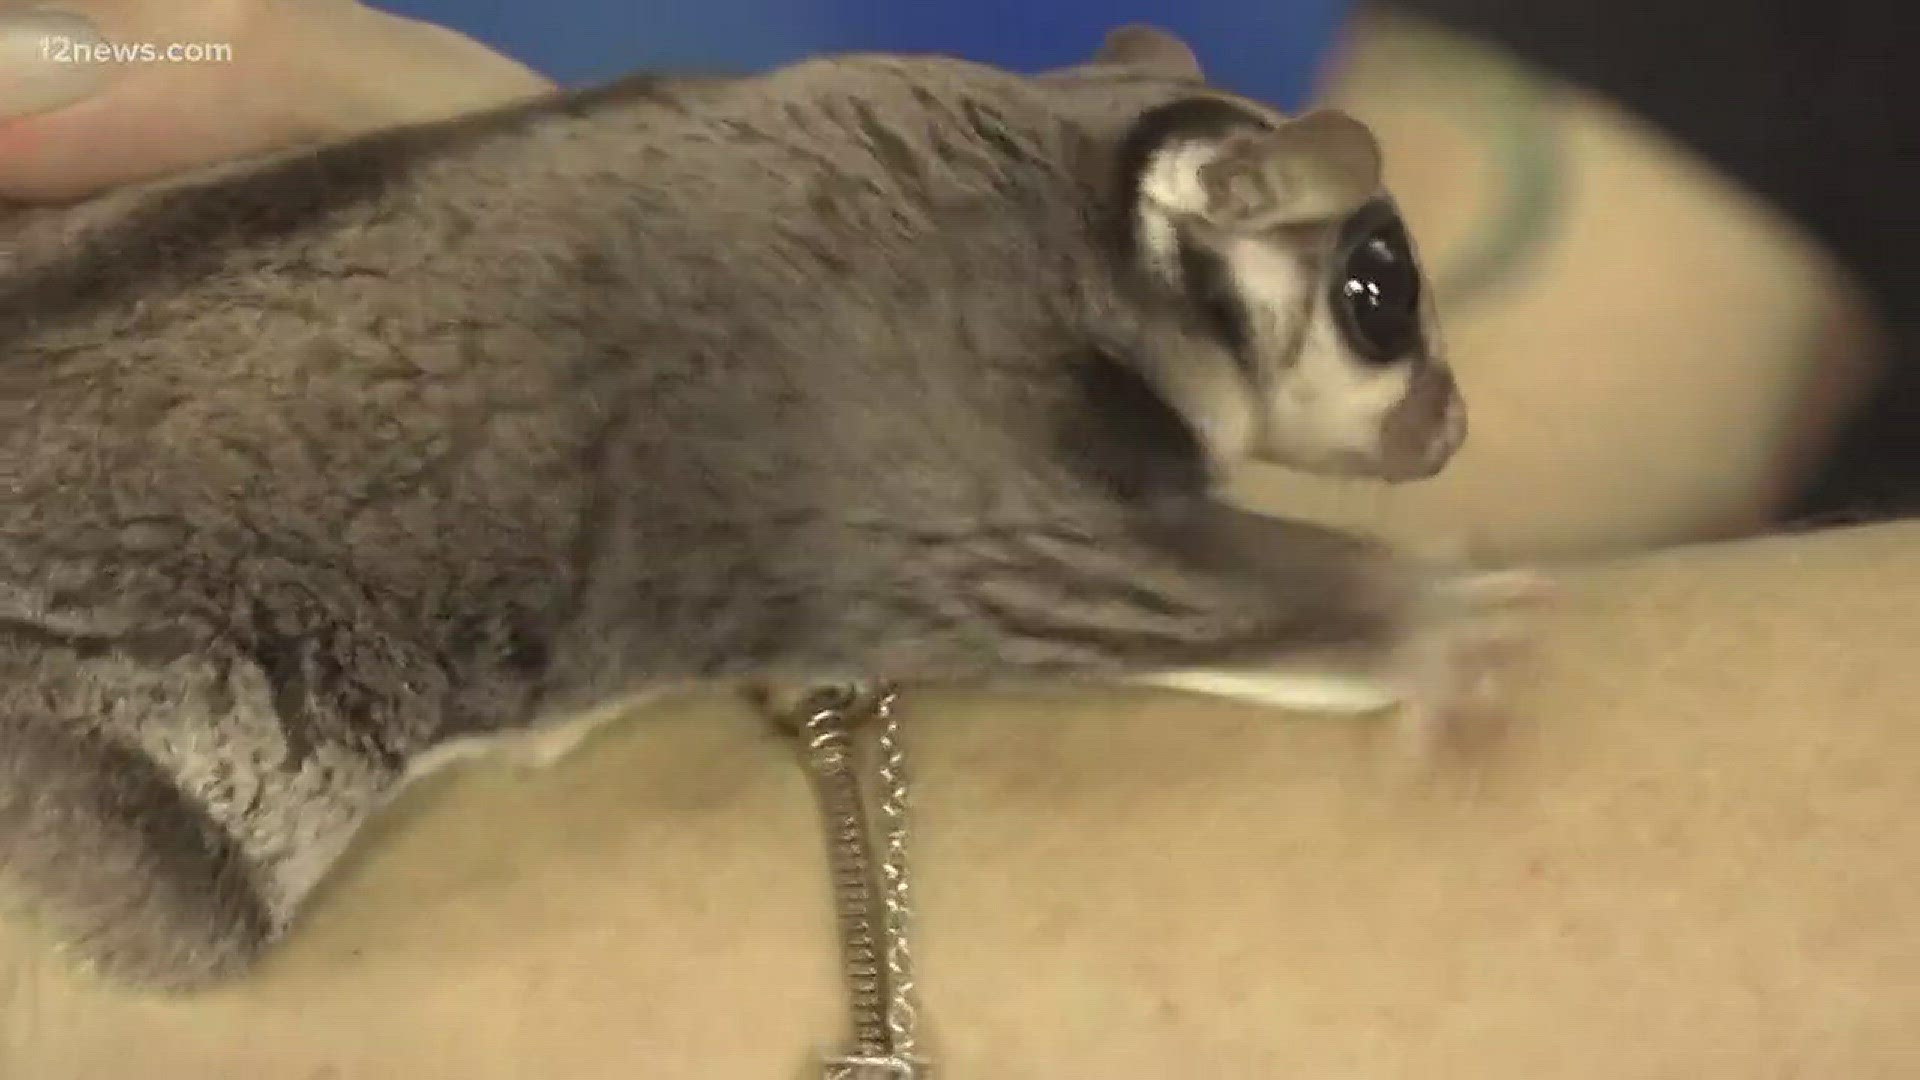 Sugar gliders are quickly becoming a popular pet that can be found for purchase in some malls, festivals and fairs.